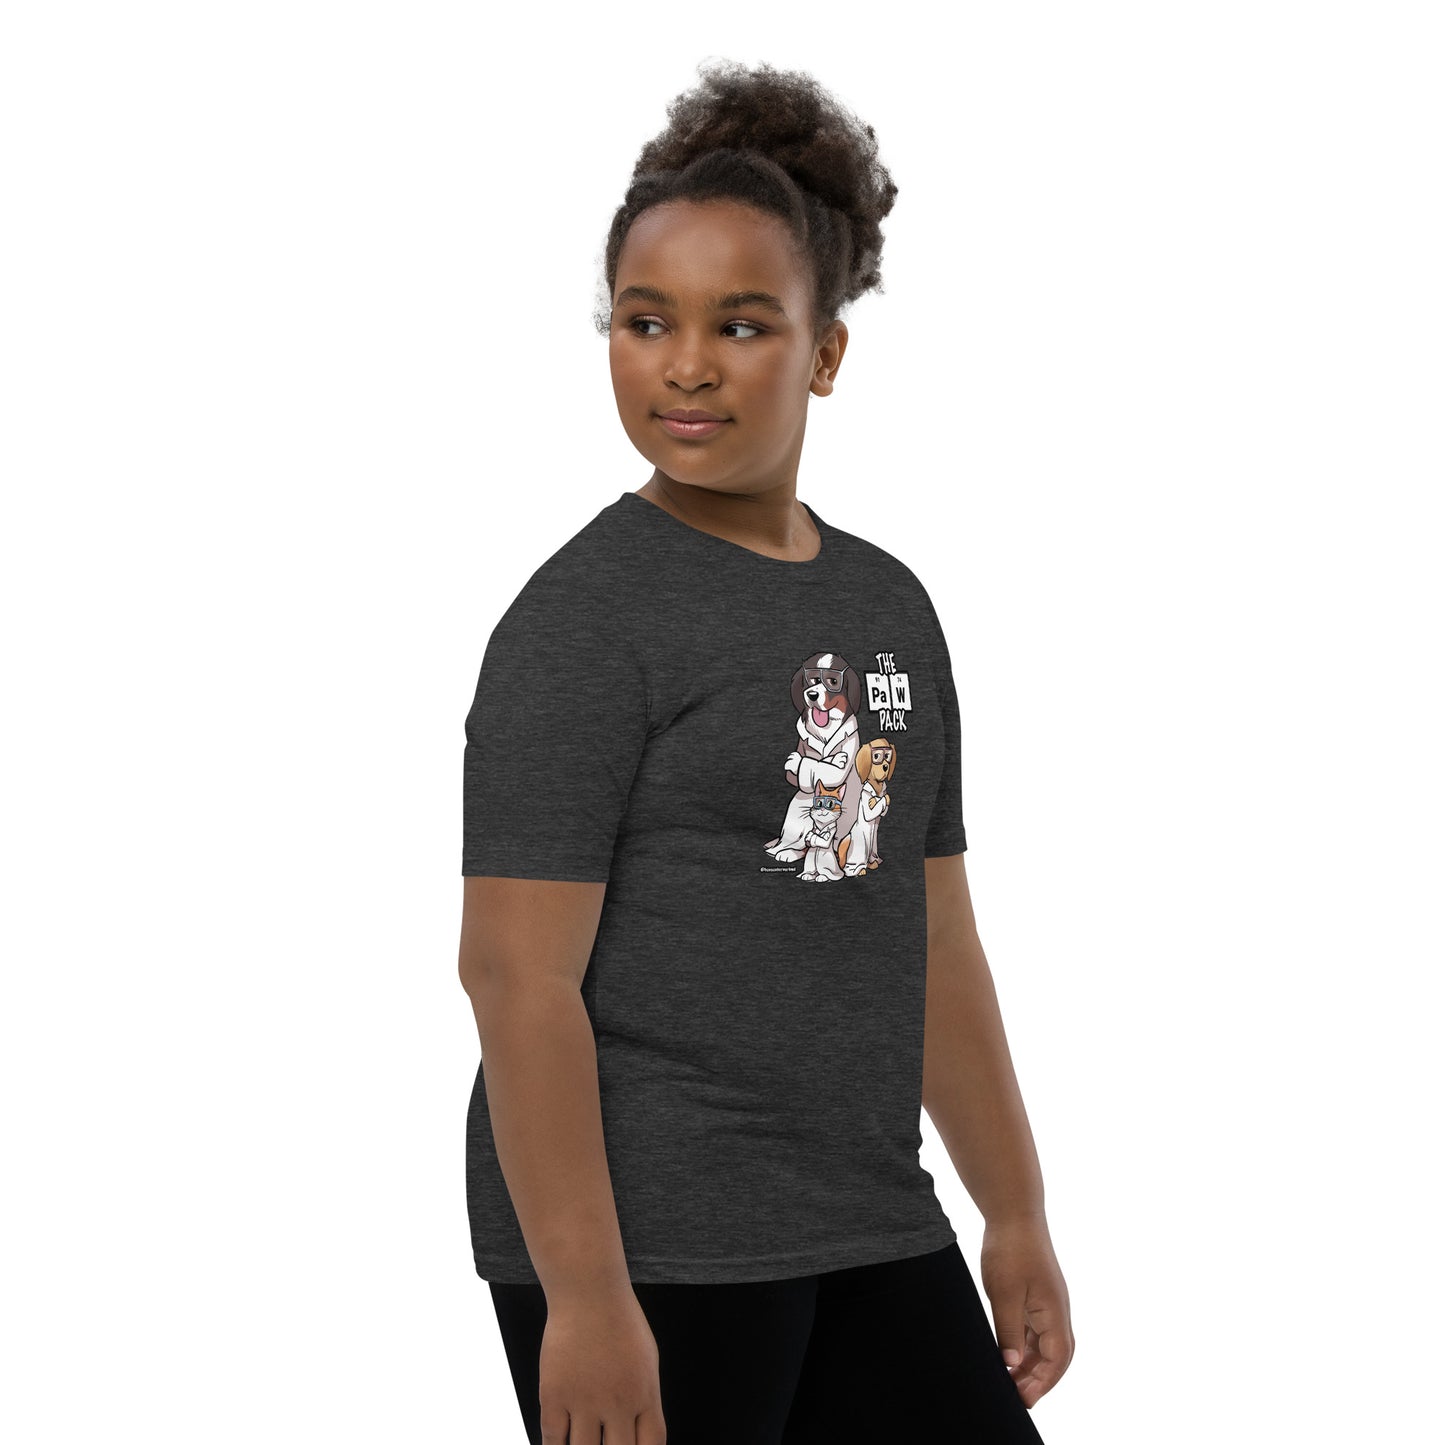 Youth Short Sleeve T-Shirt- THE P{AW PACK